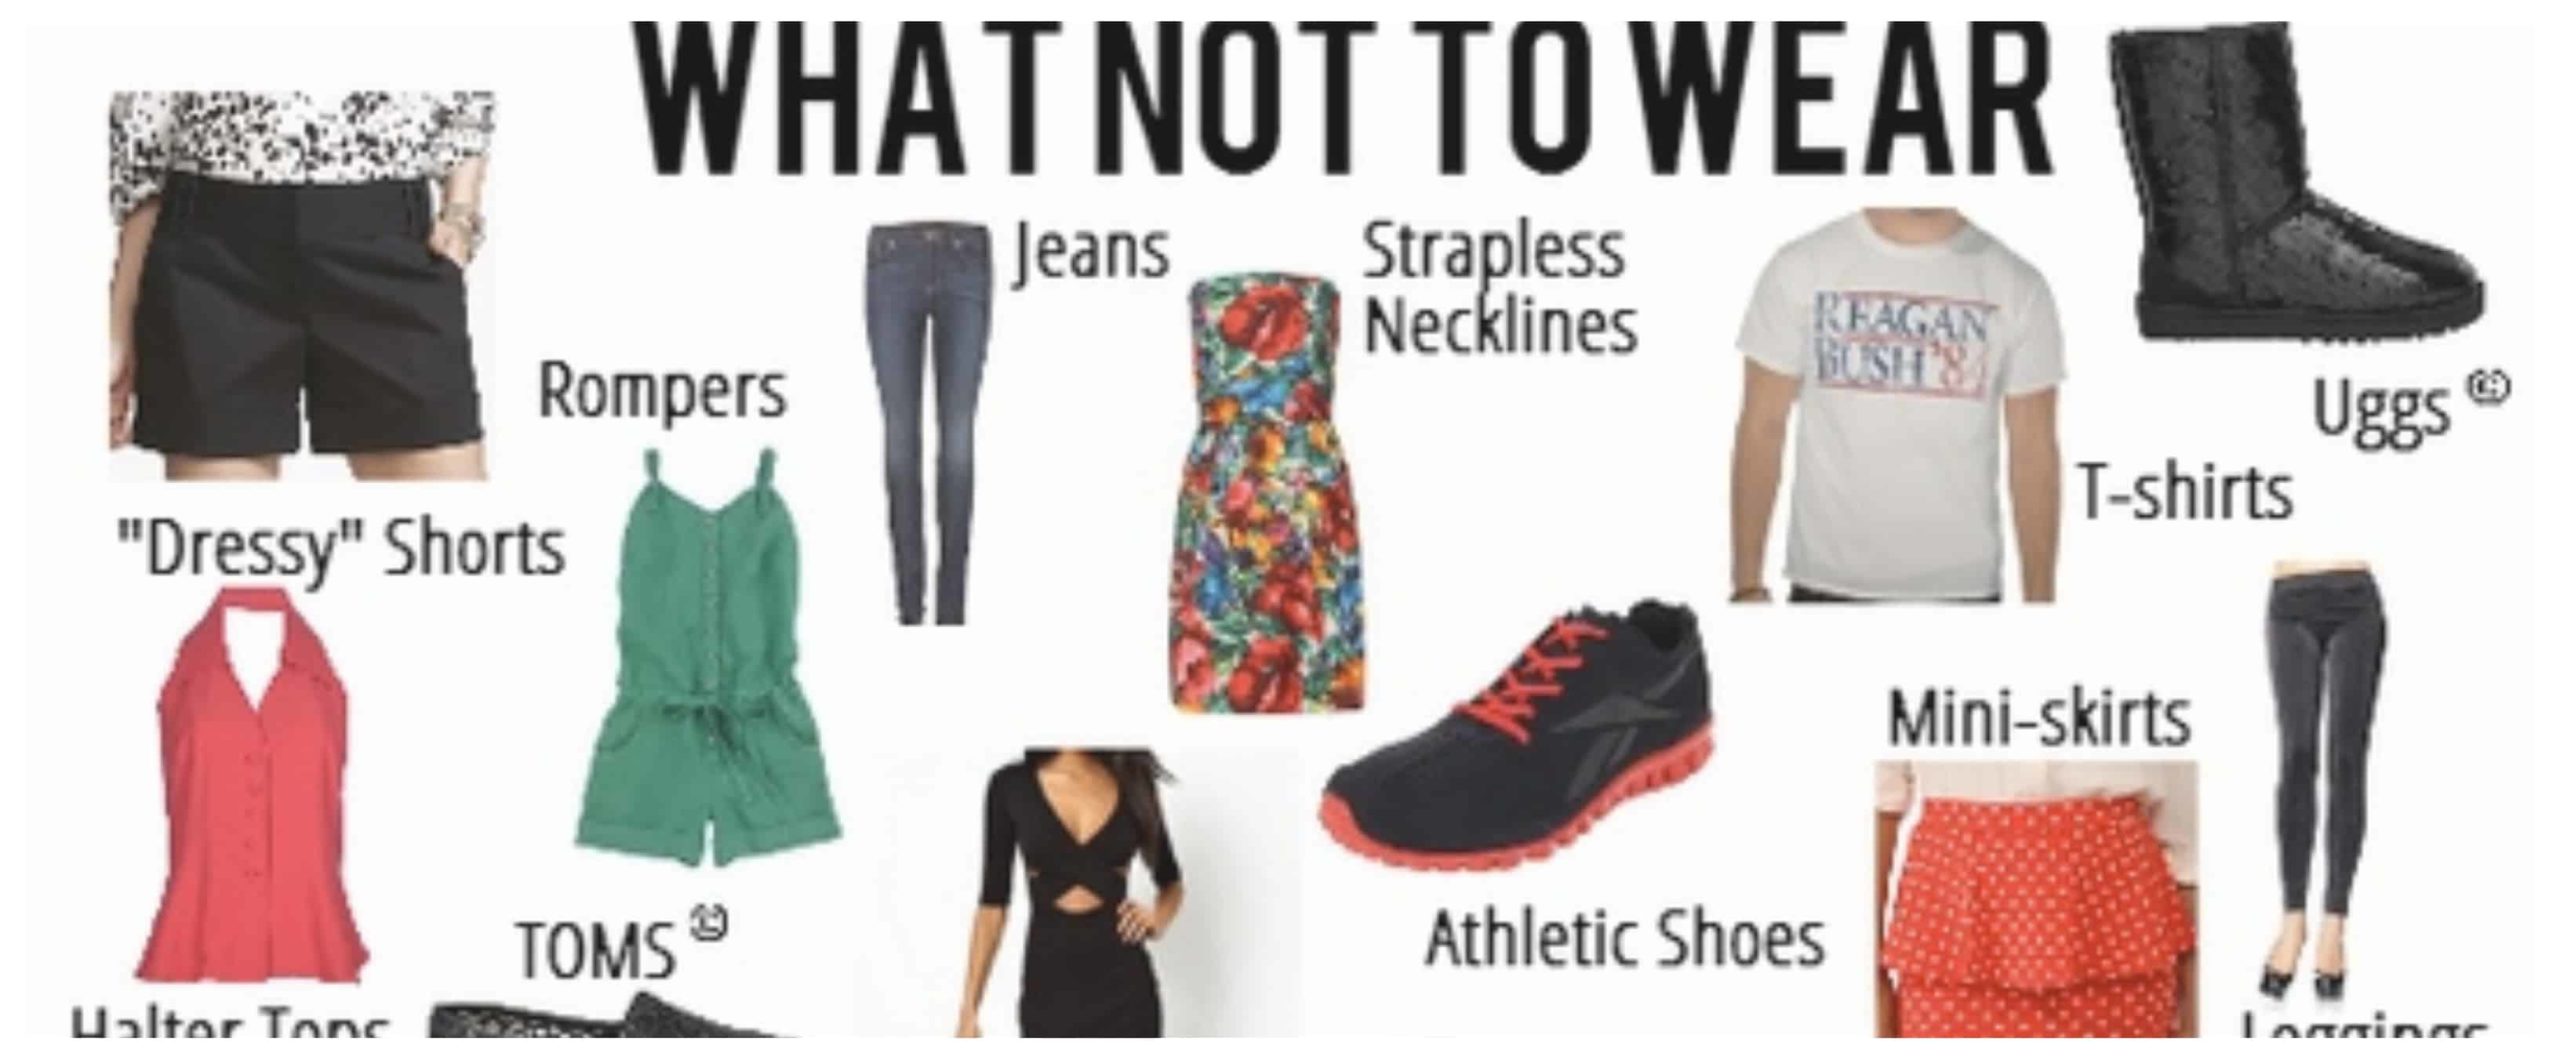 Guideline on What NOT to Wear to Work - ALL FOR FASHION DESIGN